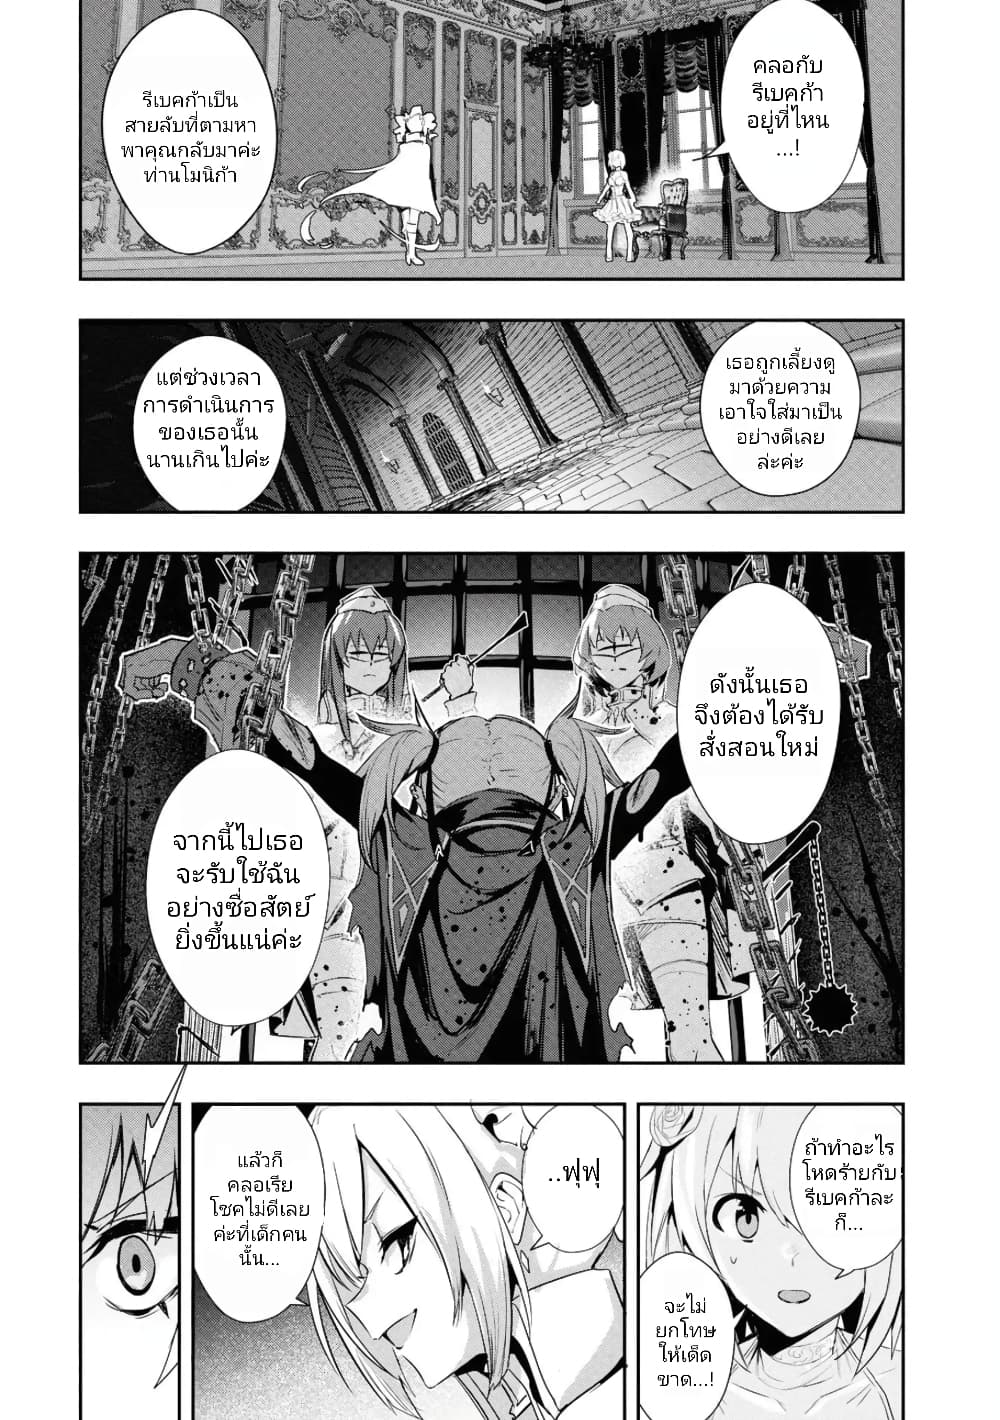 Witch Guild Fantasia 10 (13)